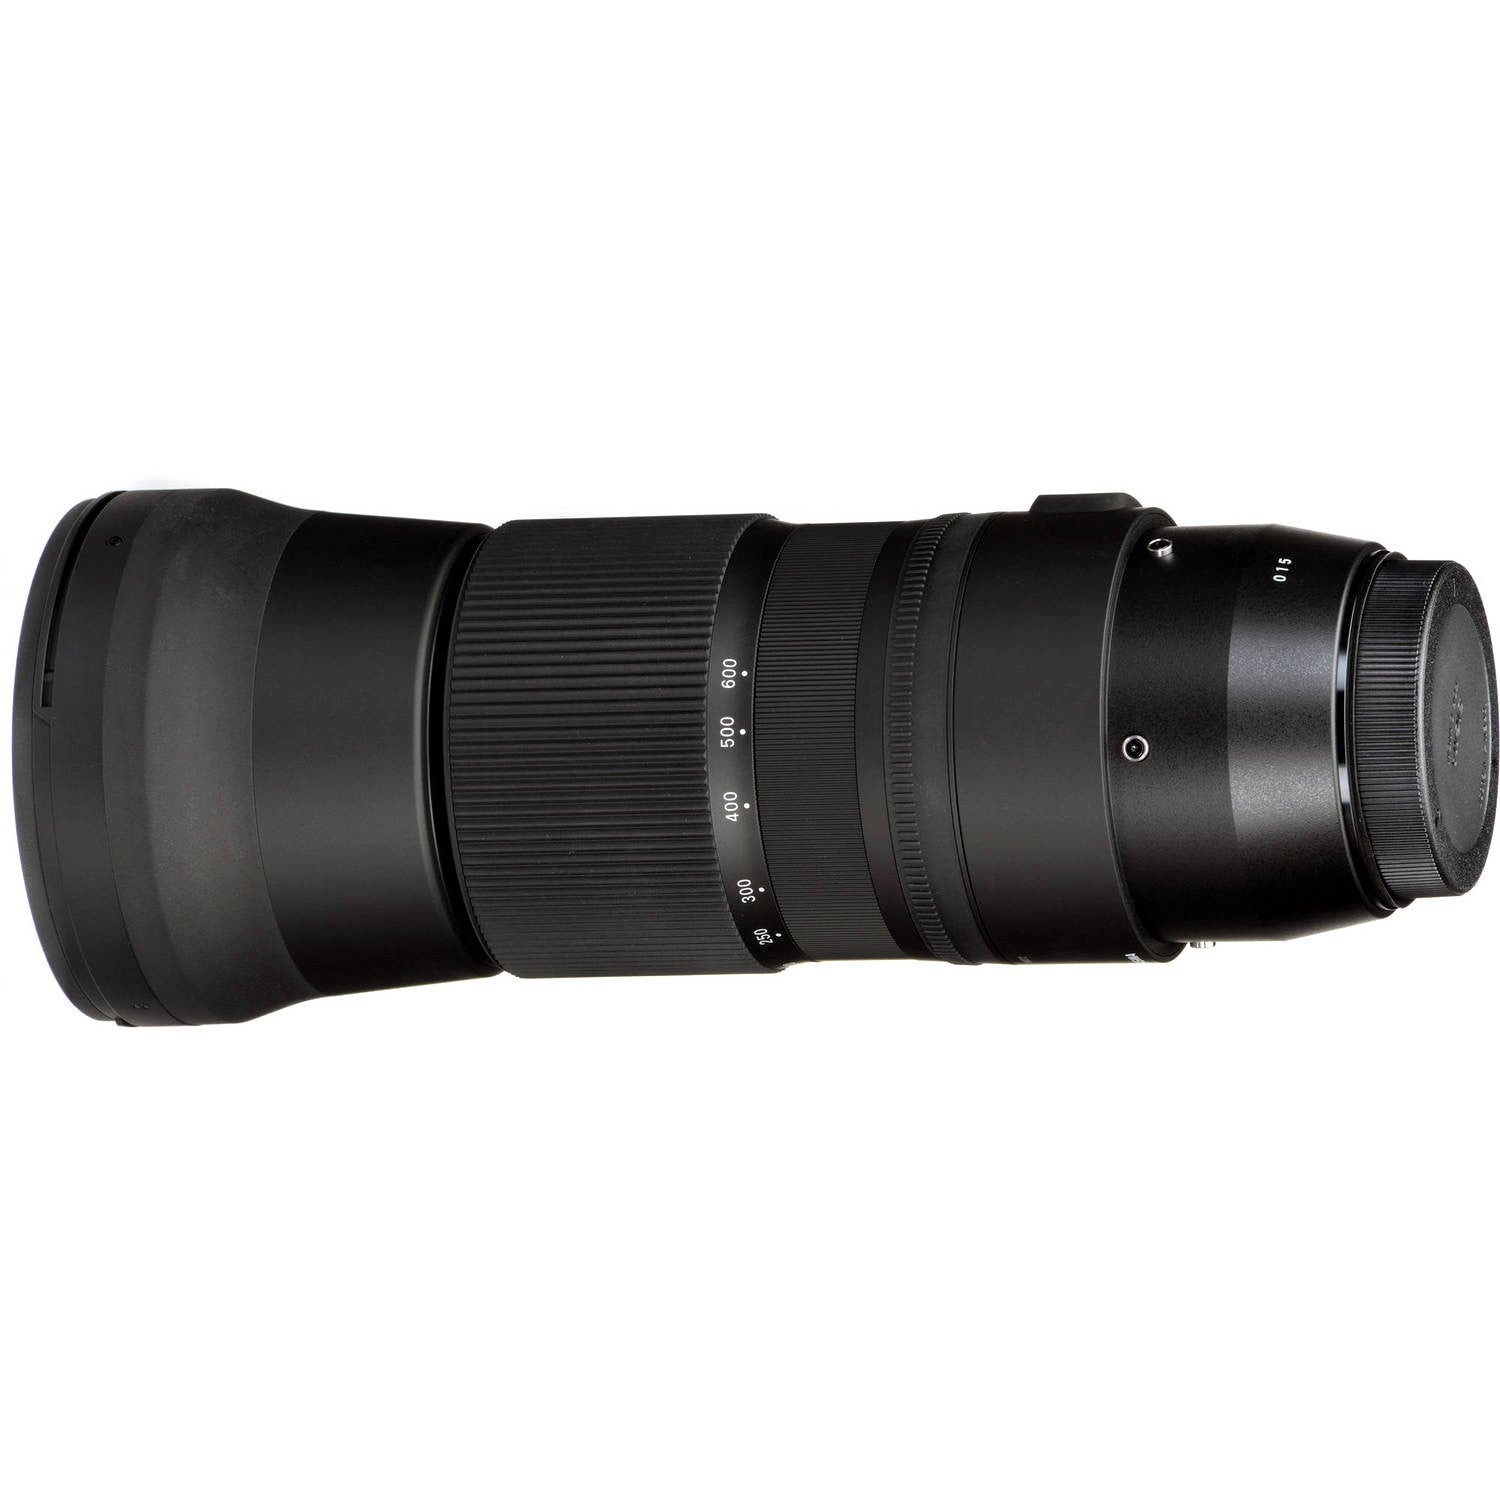 Sigma 150-600mm F5-6.3 DG OS HSM Contemporary Lens for Canon